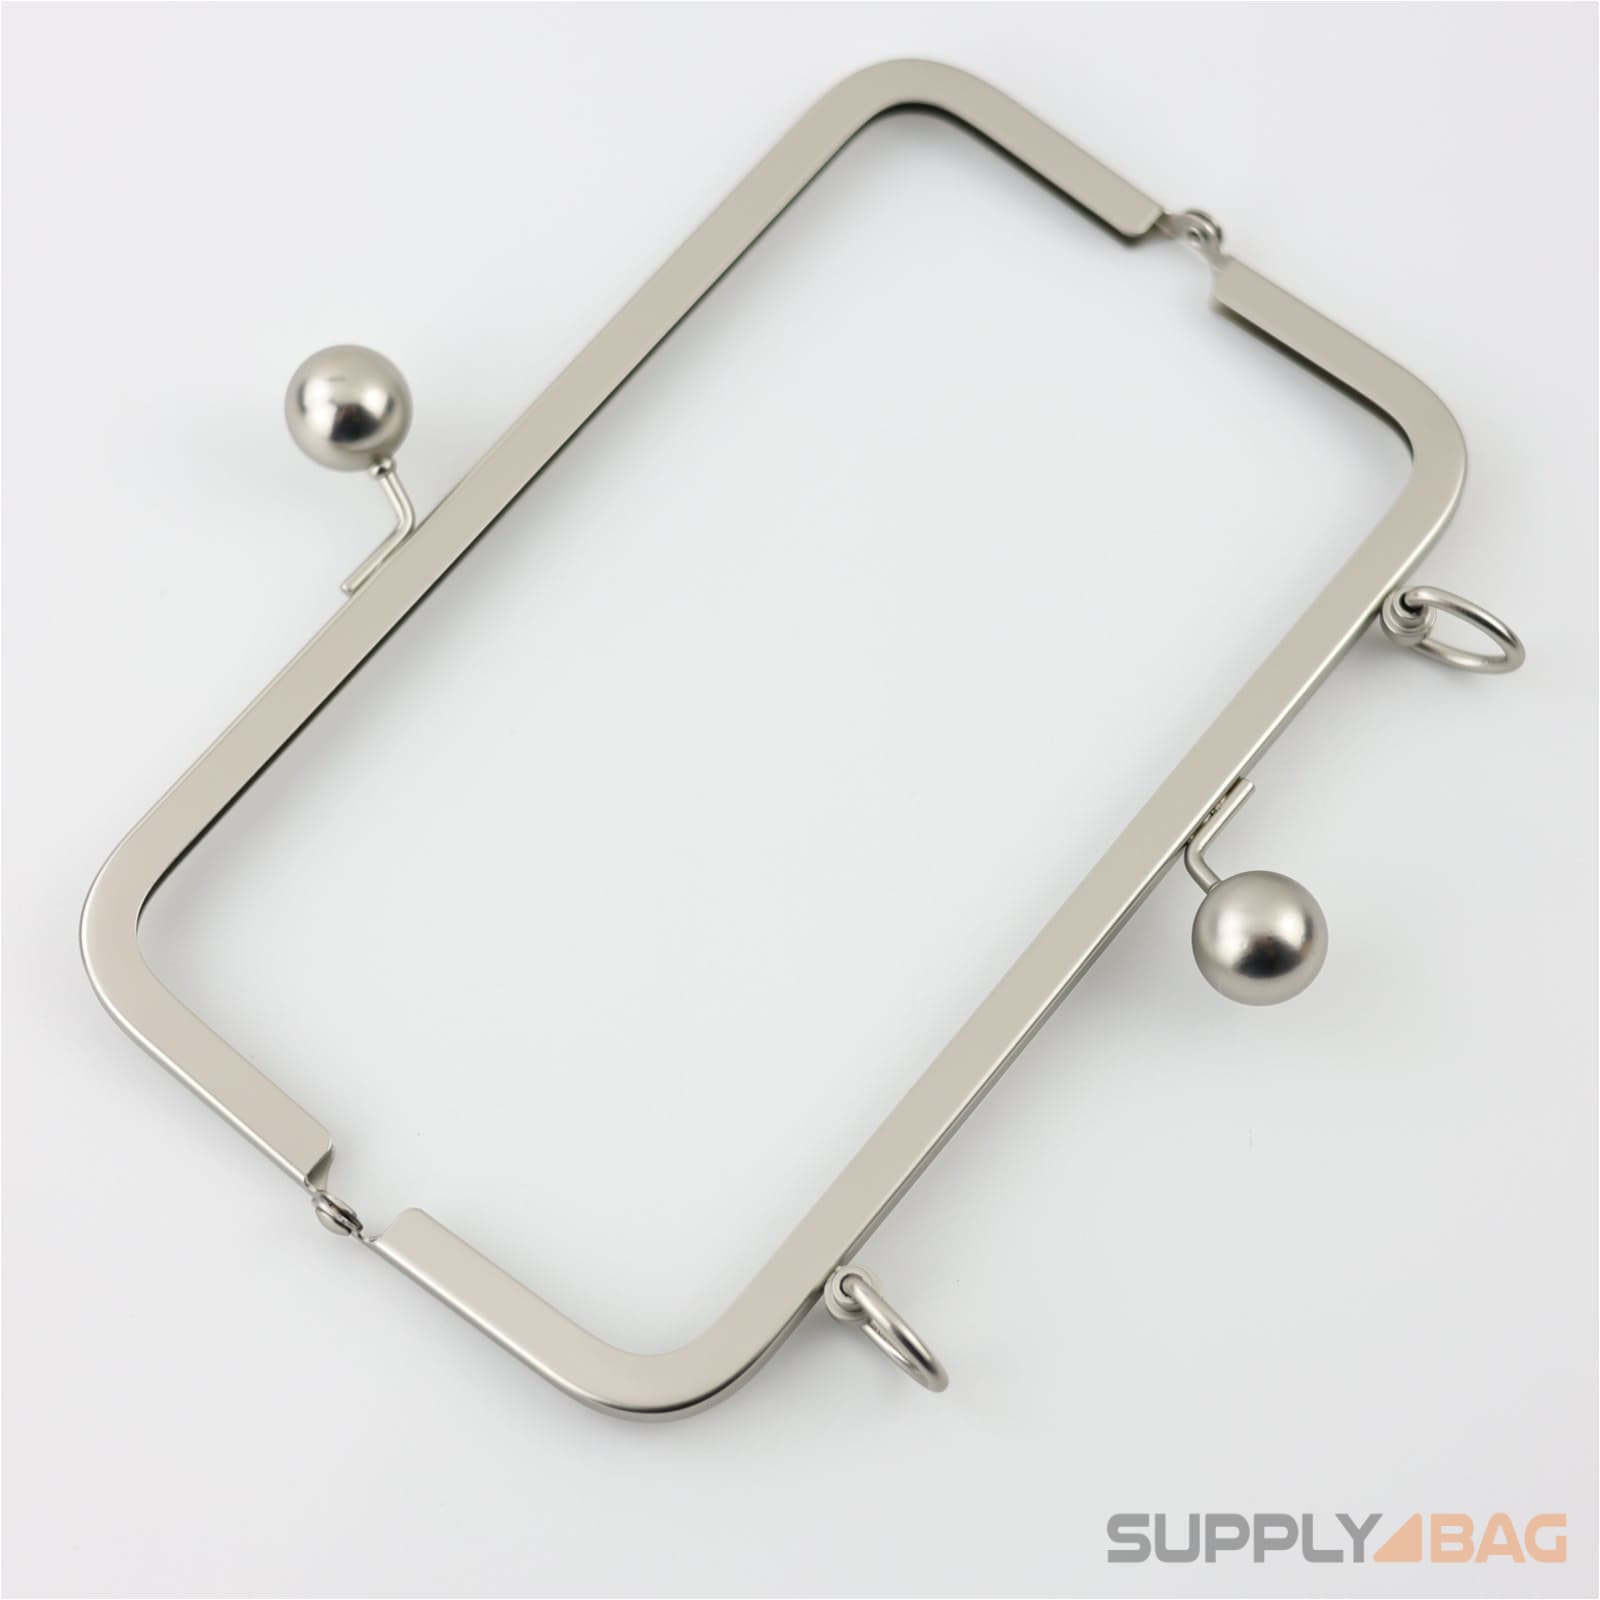 8 x 2.5 inch - Kisslock Brushed Silver Metal Purse Frame with D Rings